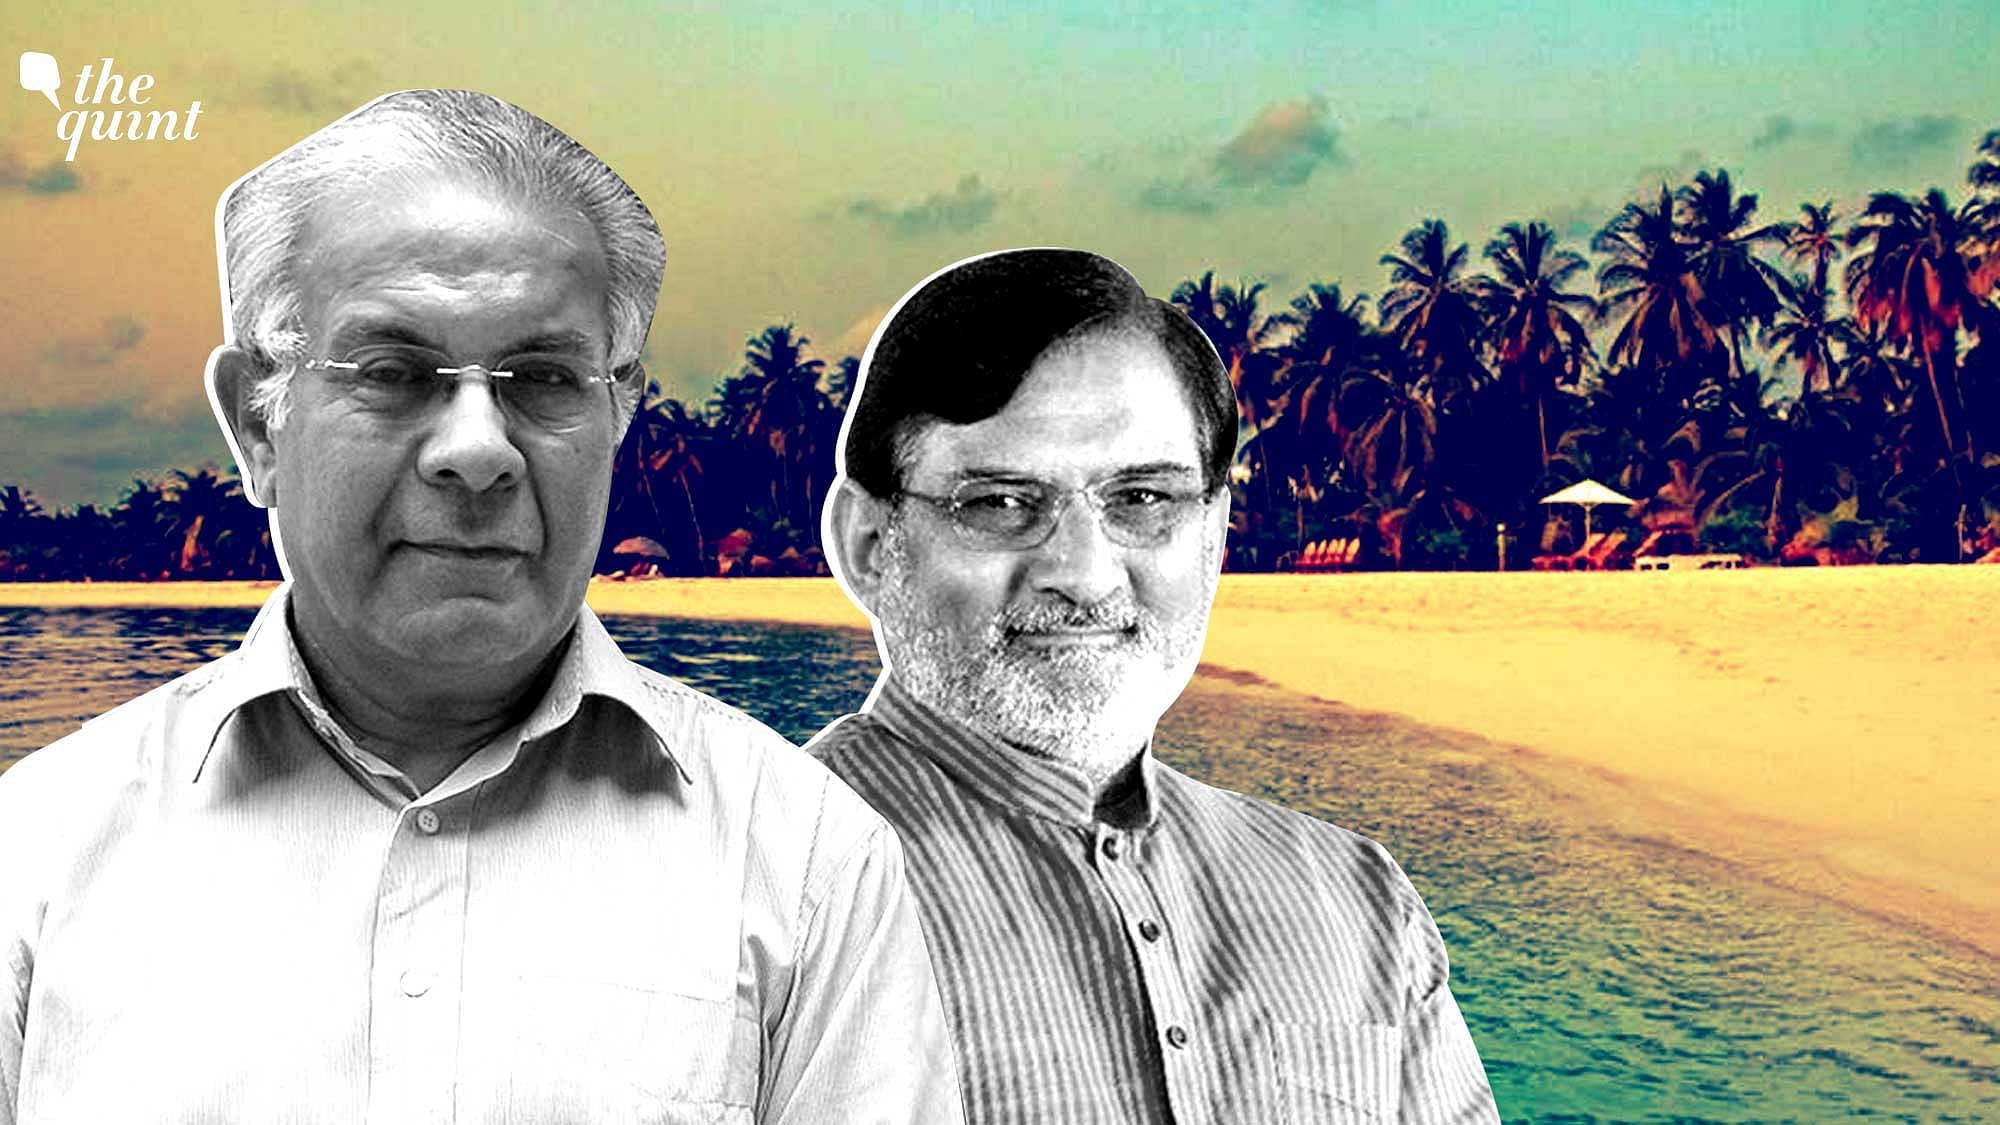 <div class="paragraphs"><p>The Quint spoke to Wajahat Habibullah, the former administrator of Lakshadweep, to understand how the regulations could be detrimental to the archipelago’s ecology and its inhabitants.</p></div>